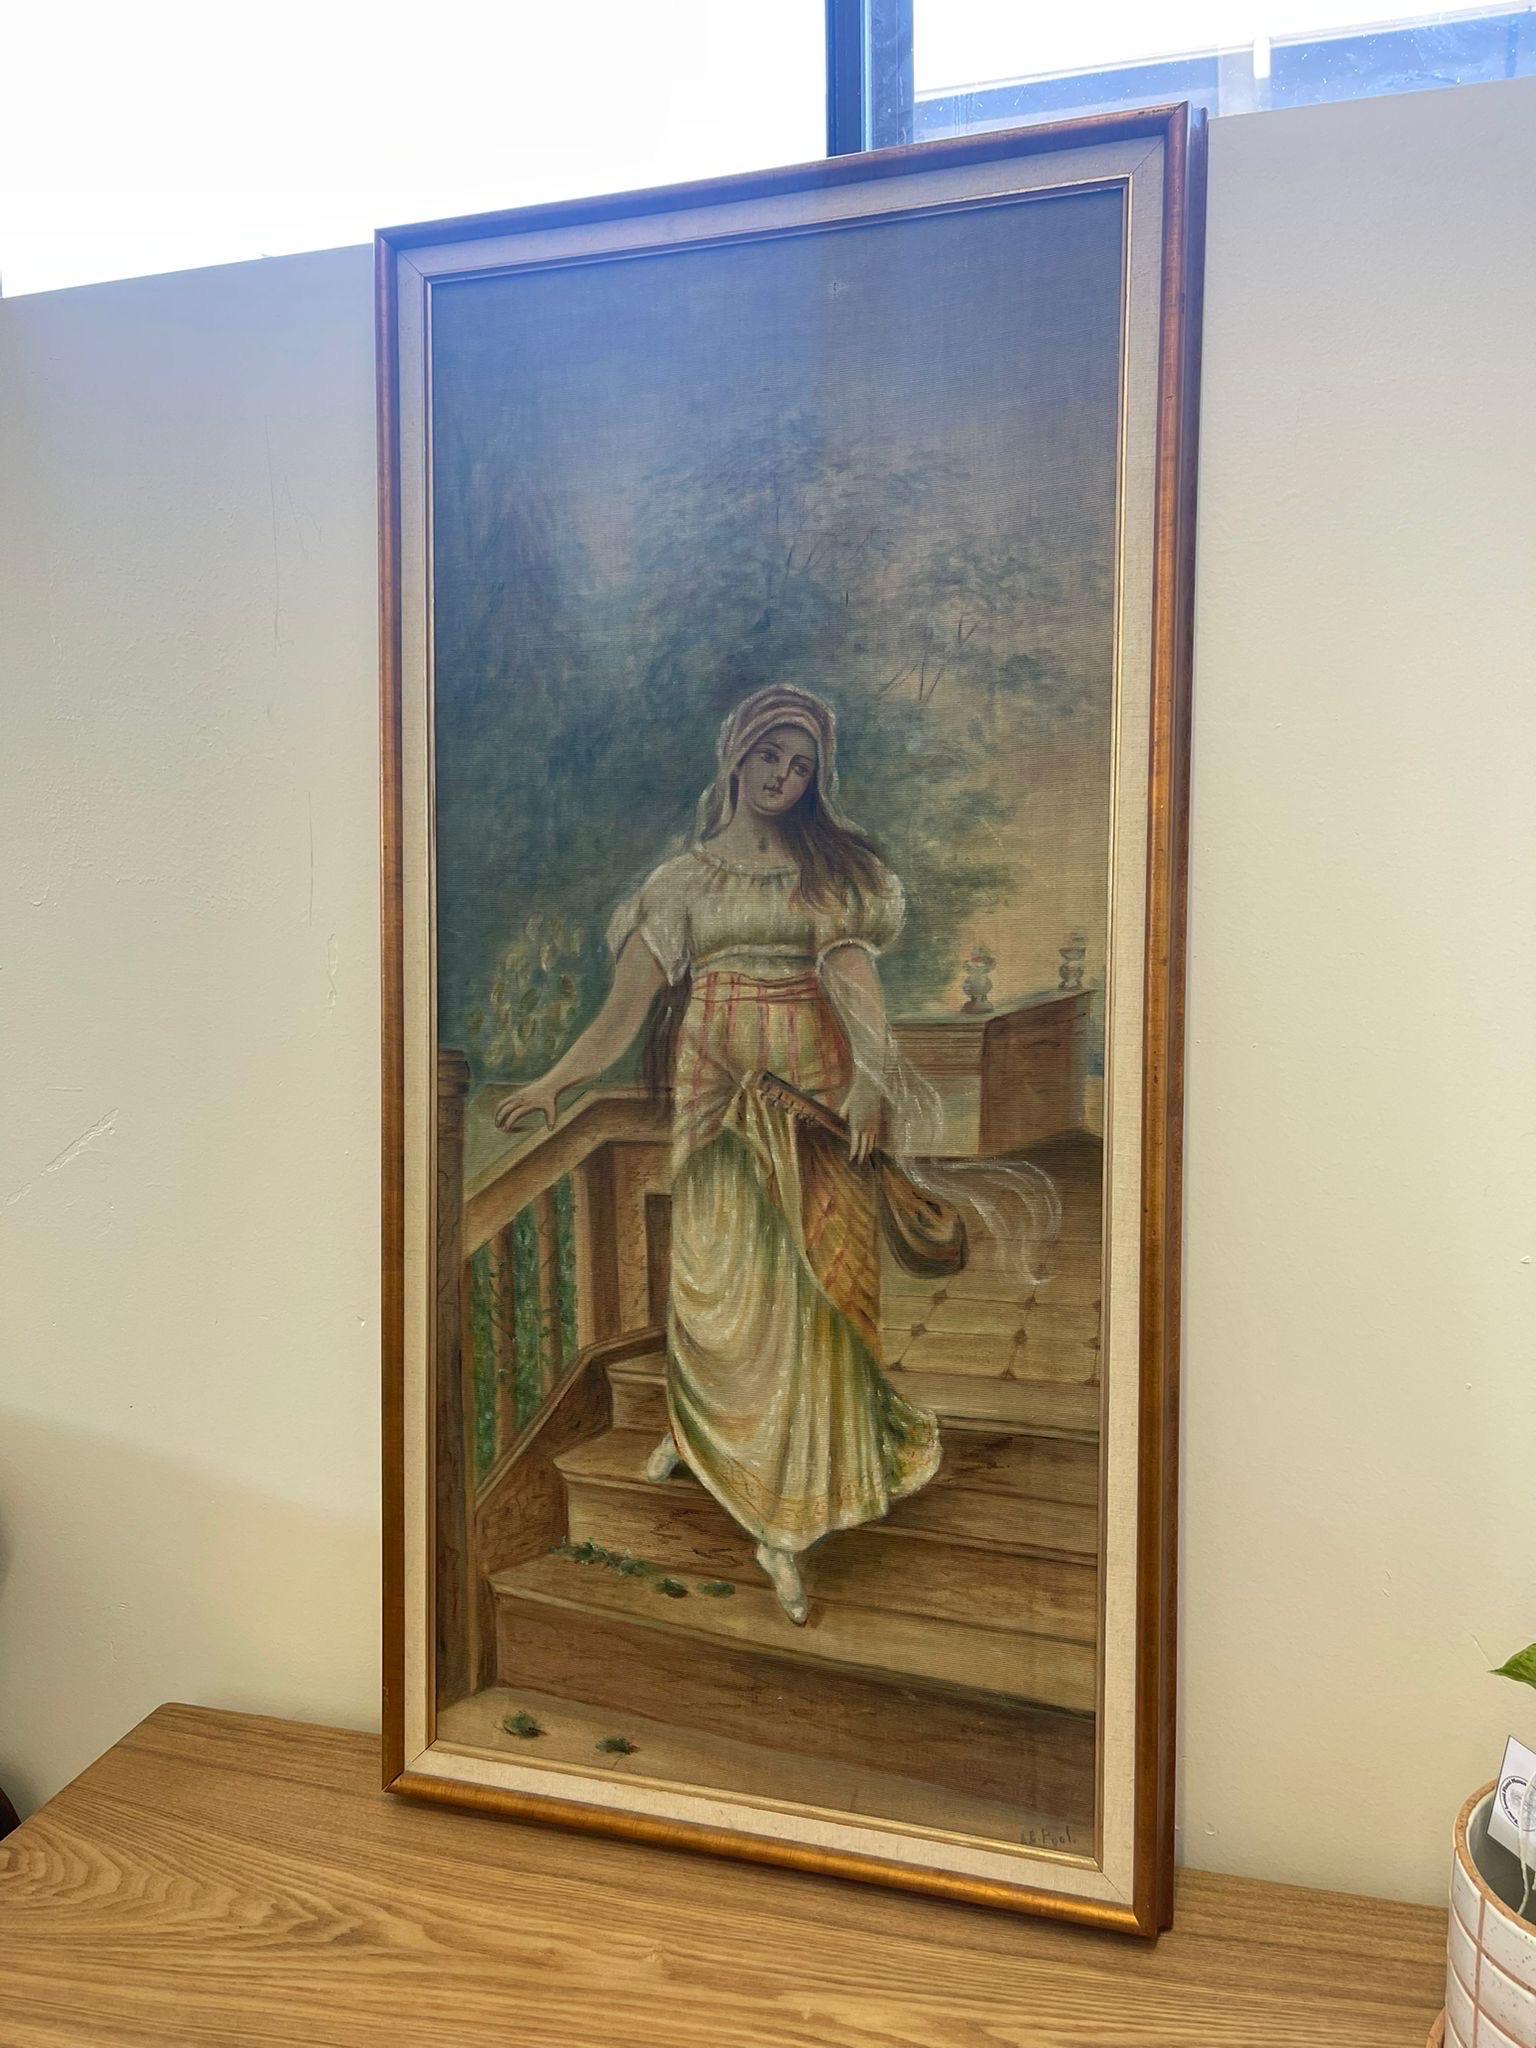 This Artwork depicts a woman with a guitar walking down steps. Possibly oil or acrylic. Professionally framed and matted. Vintage Condition Consistent with Age as Pictured.

Dimensions. 23 W ; 1/2 D ; 46 H